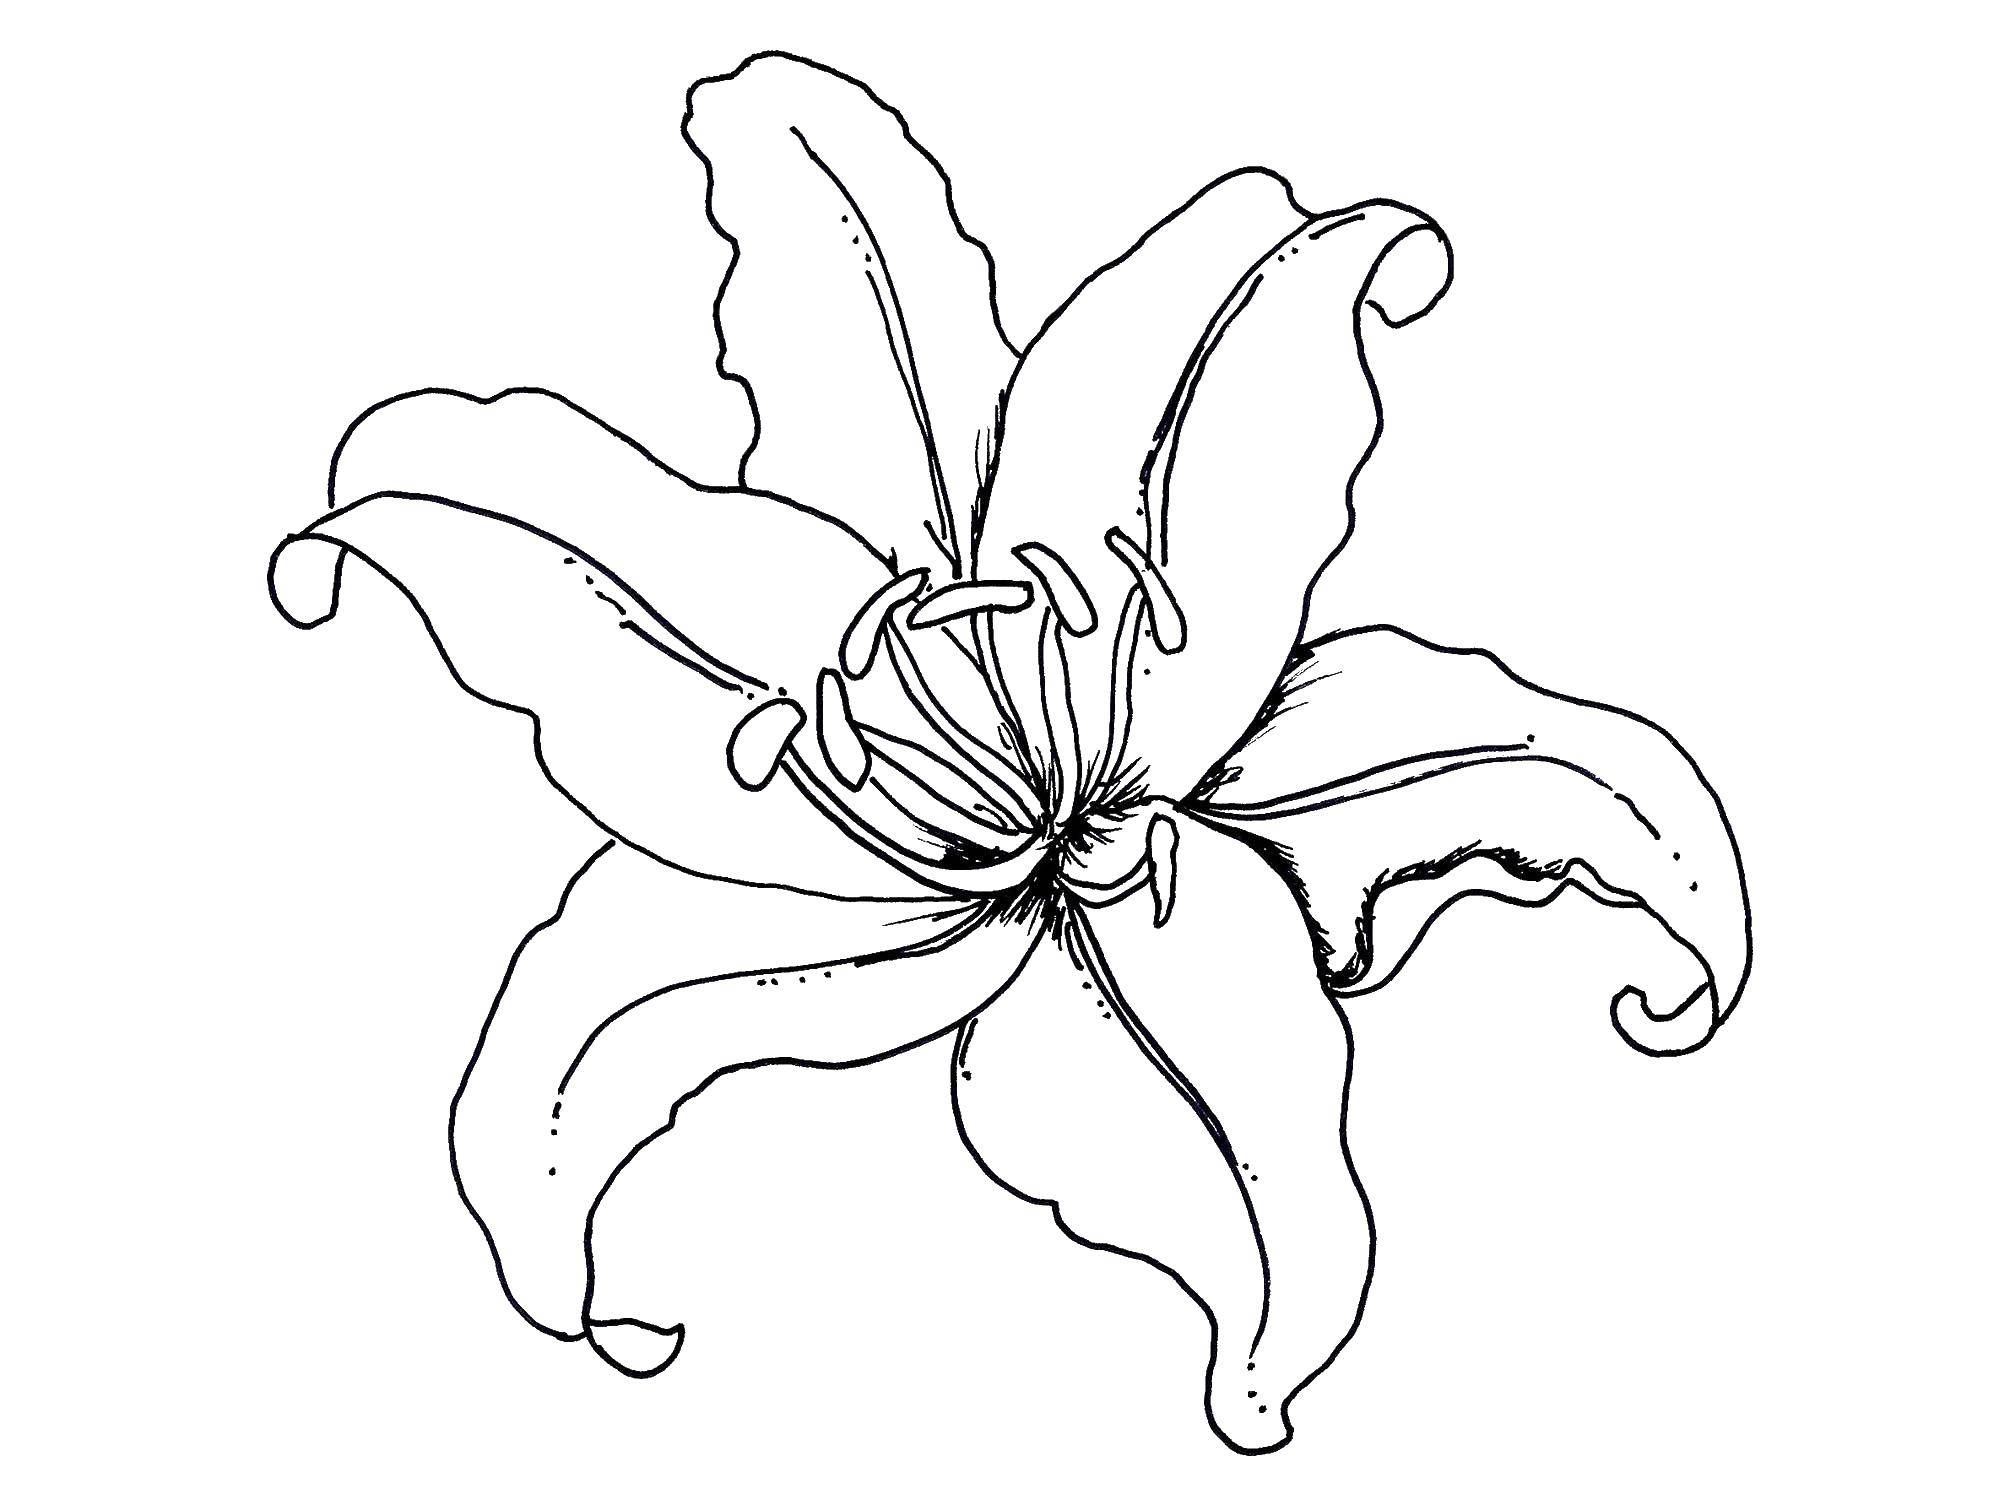 Coloring Lily. Category flowers. Tags:  Flowers.